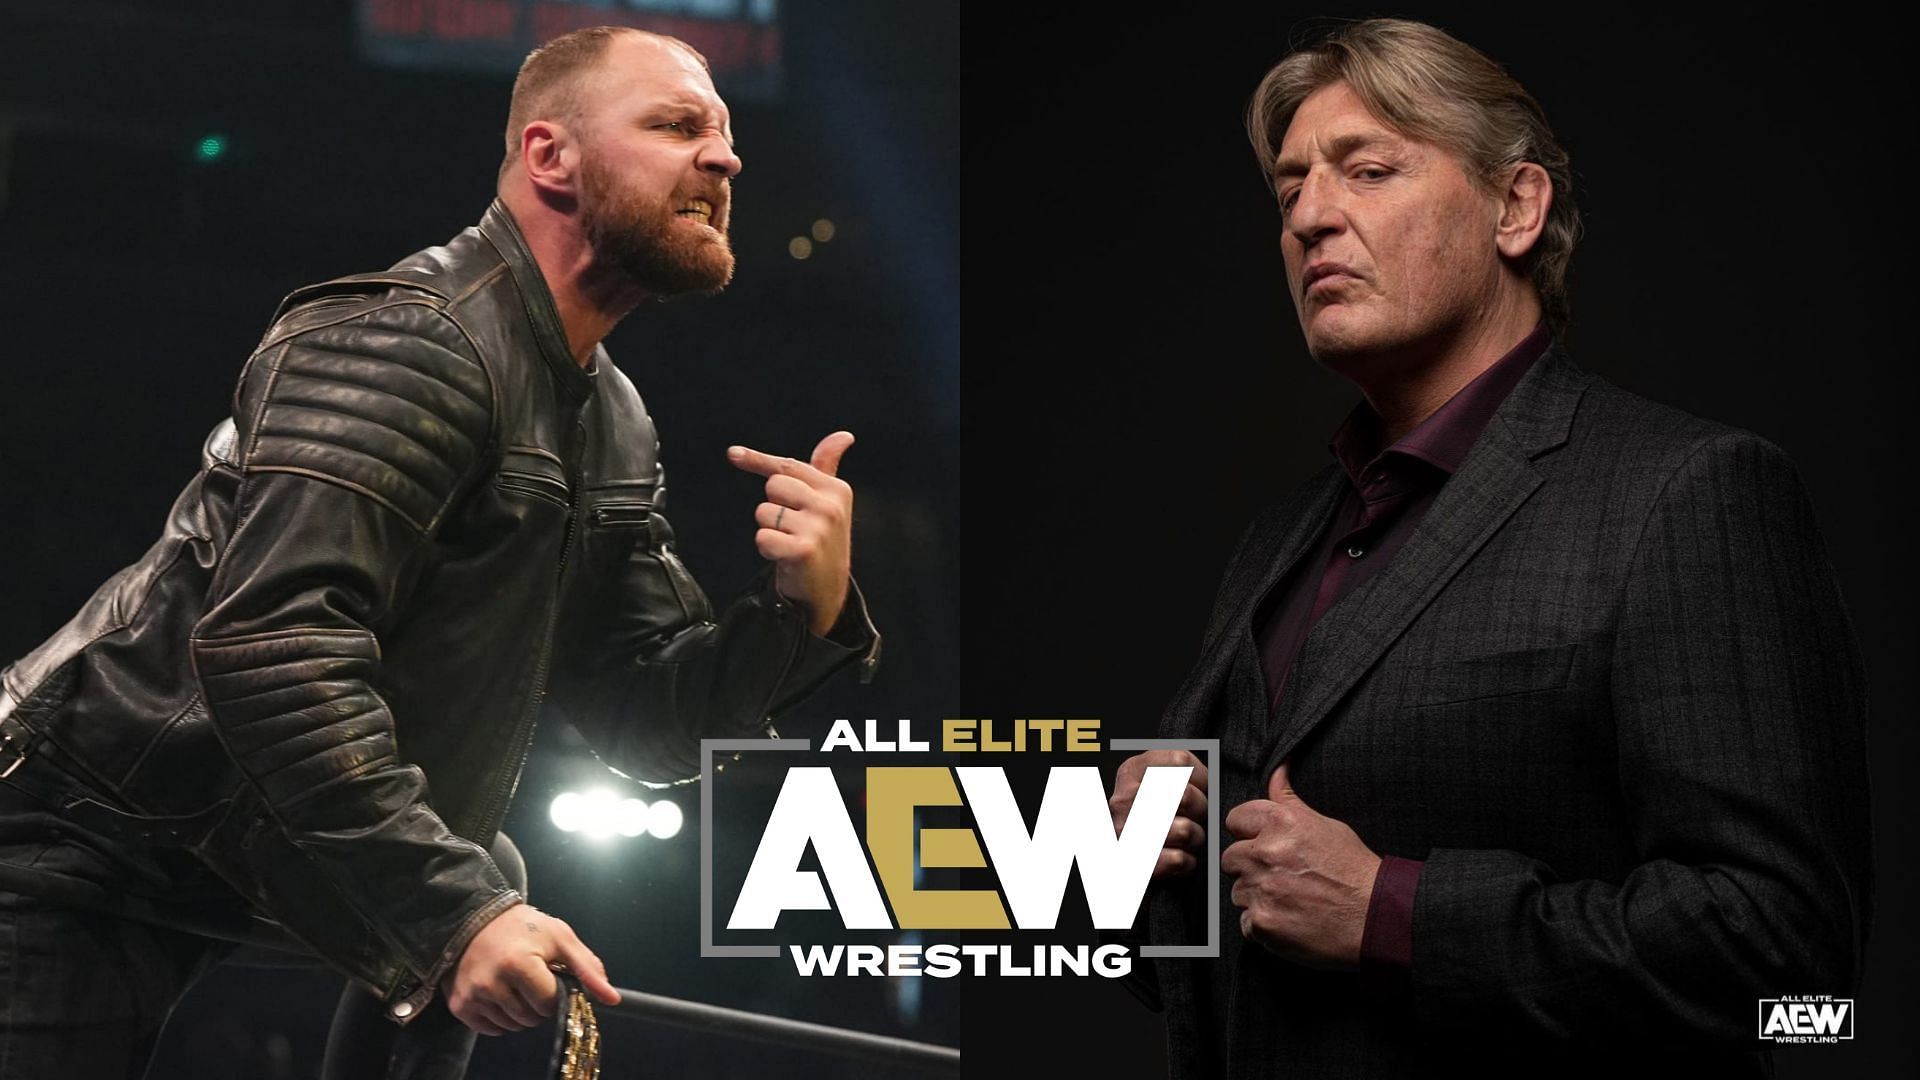 William Regal turned on Jon Moxley to help MJF capture the AEW World Championship